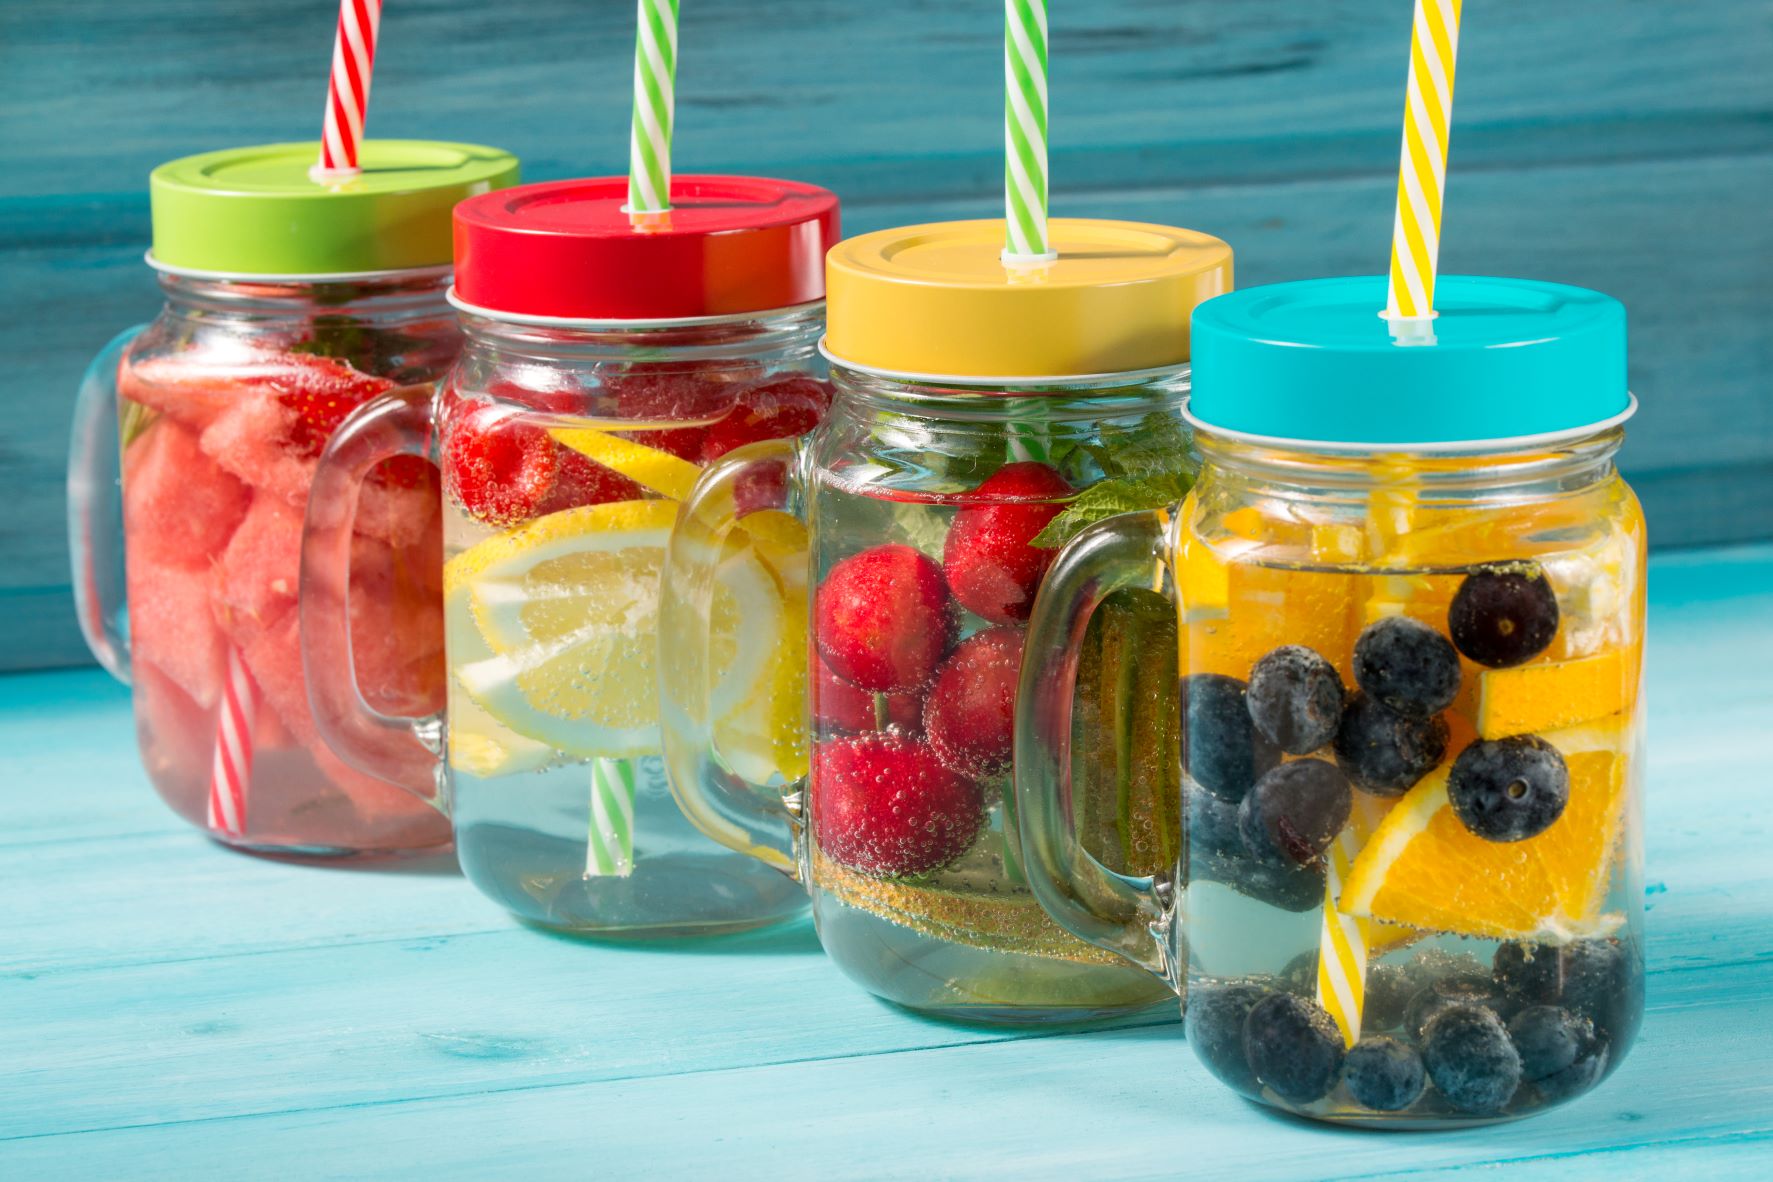 How to Make Fruit Infused Water